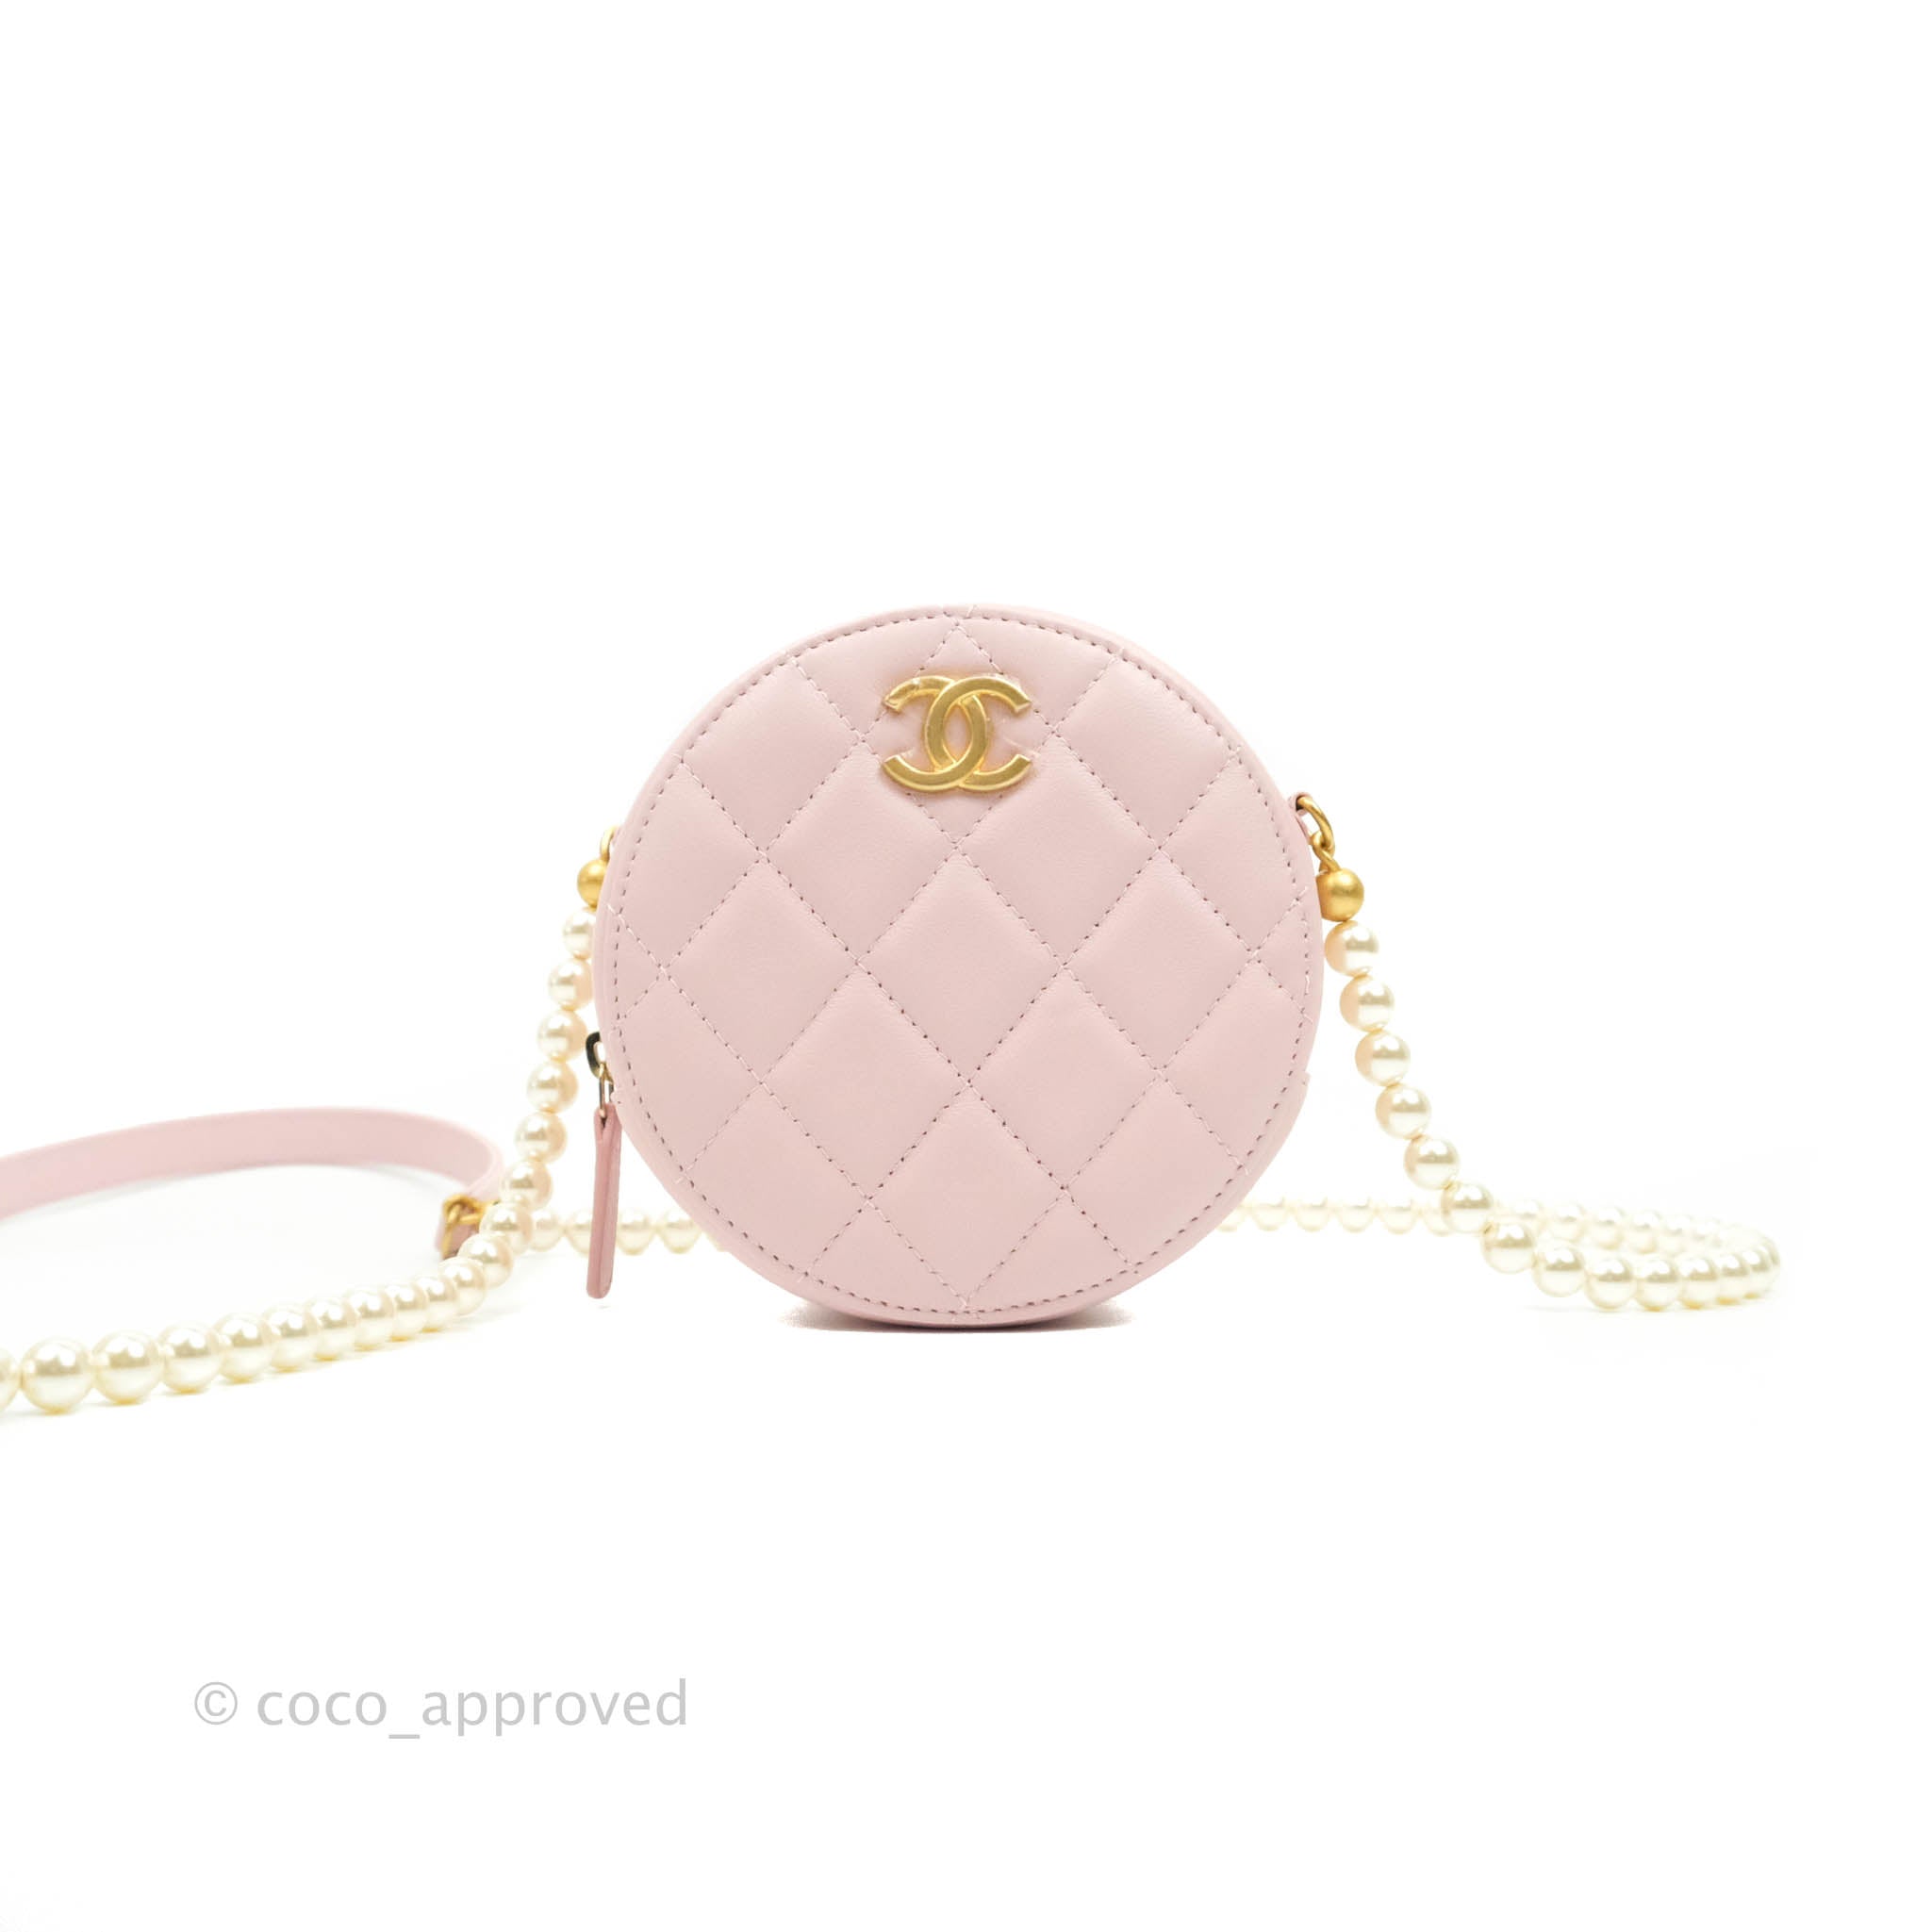 Putting Chanel Quota and Price Hike Rumors to Rest - PurseBop